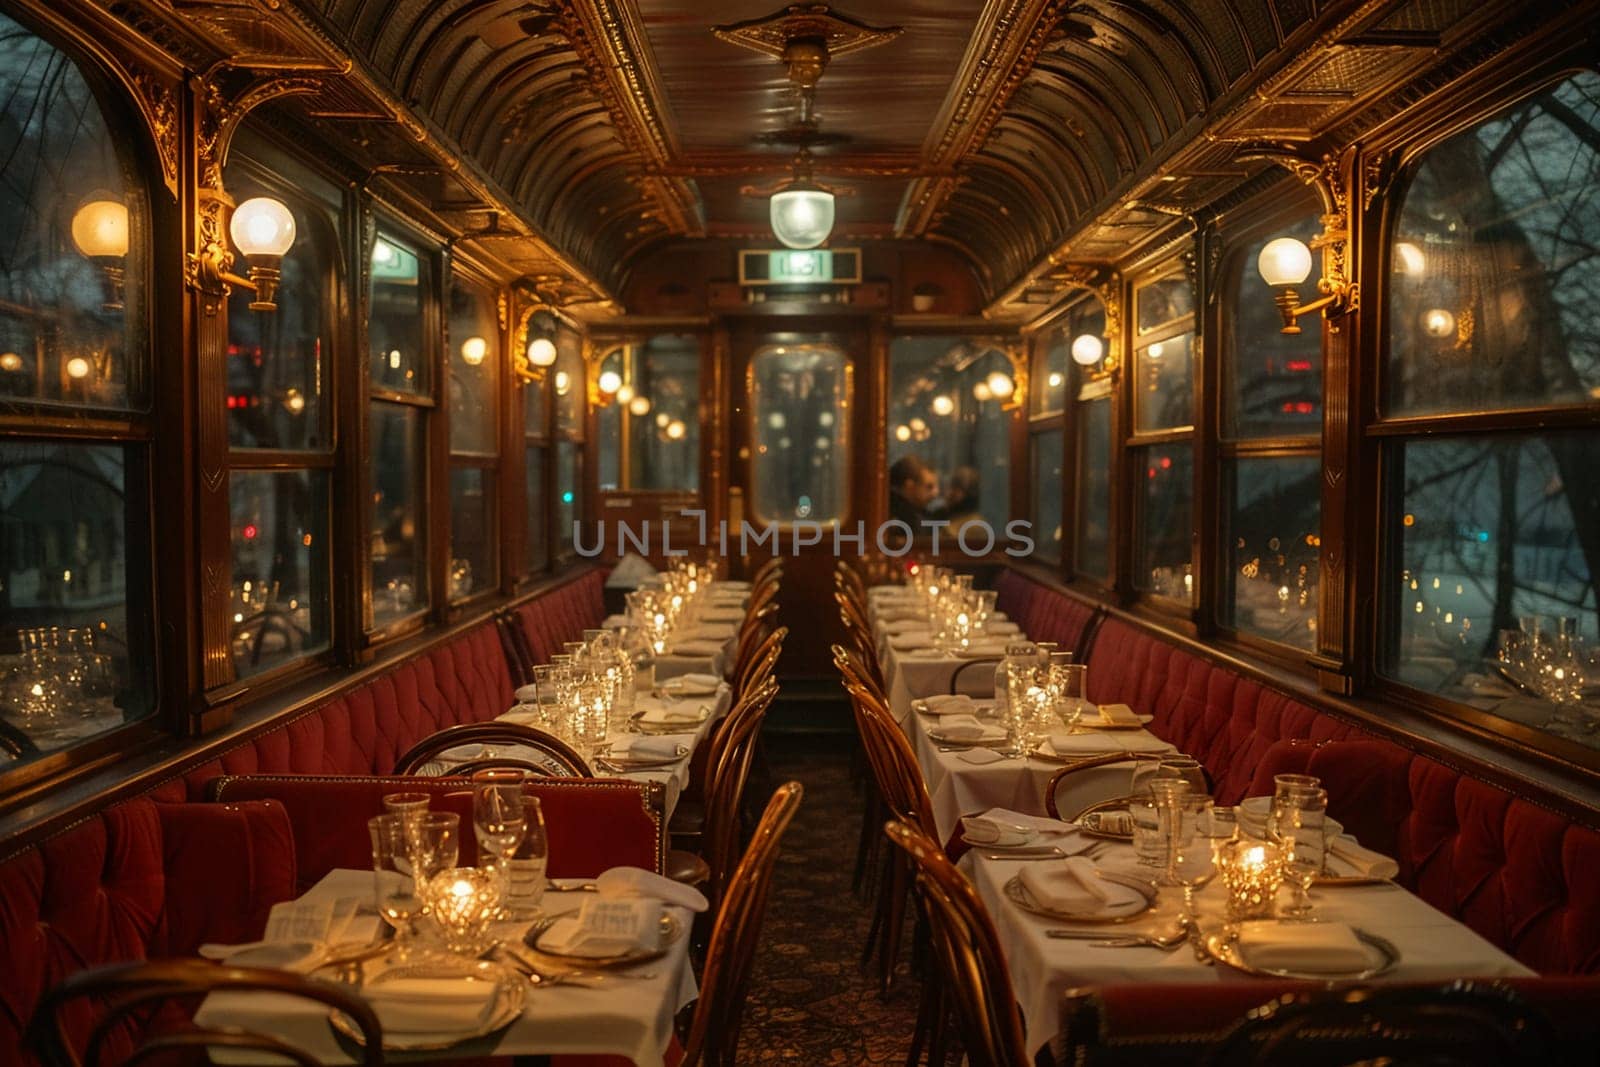 Vintage train car dining experience with period details and intimate seating